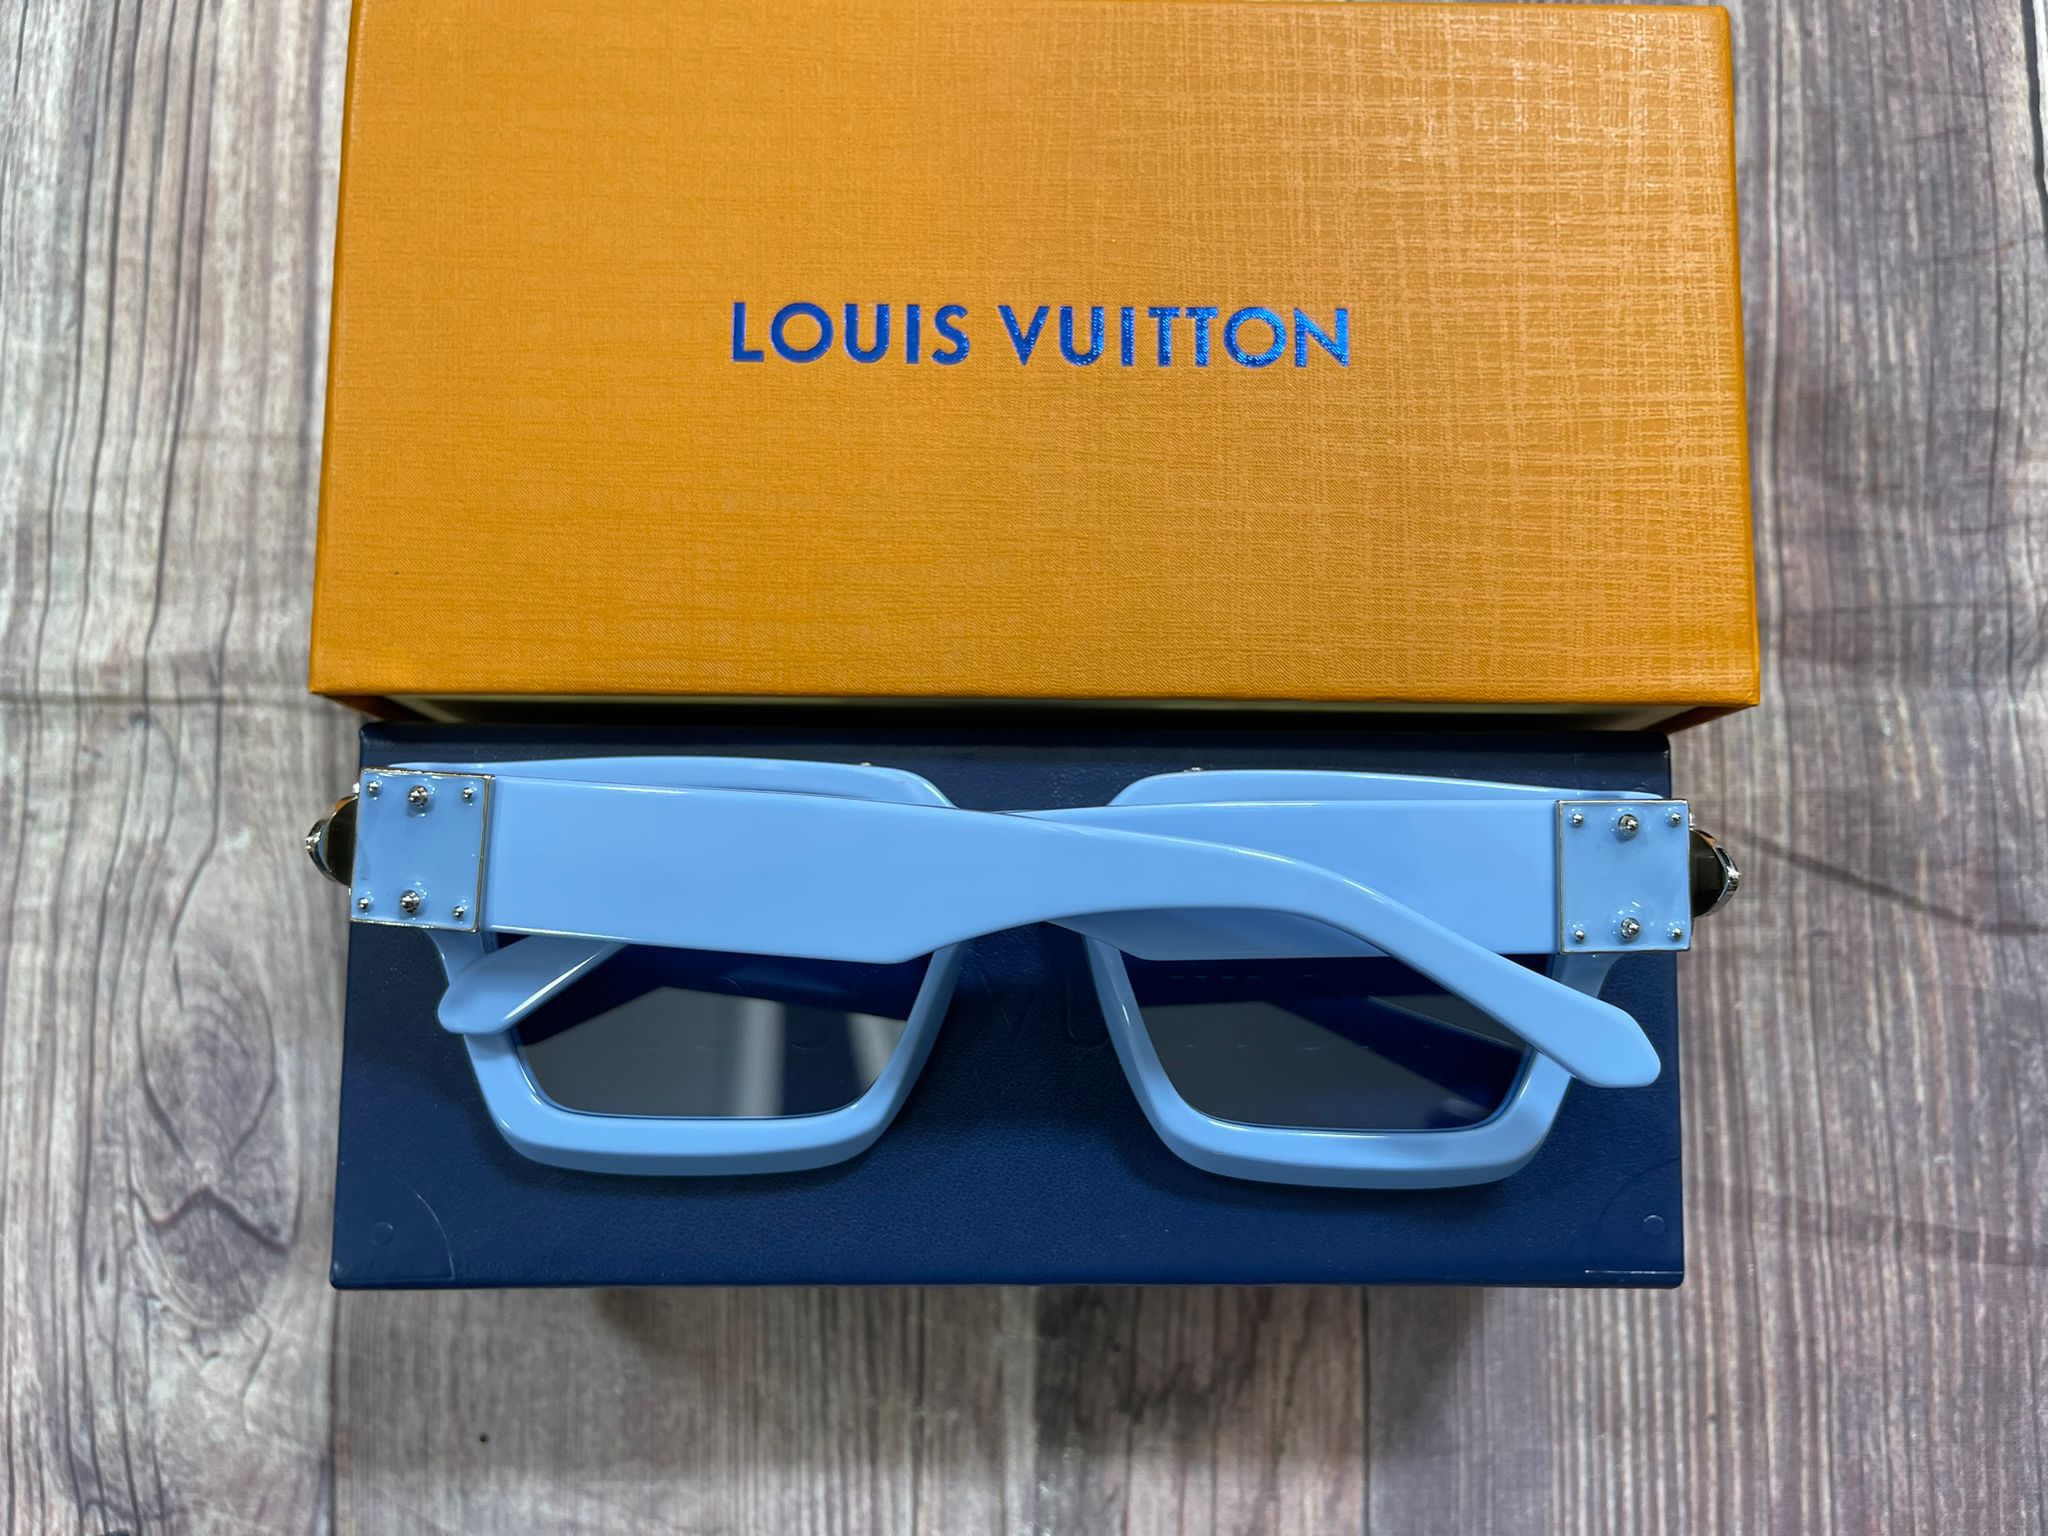 Louis Vuitton Millionaire Glasses for Sale in Brooklyn, NY - OfferUp